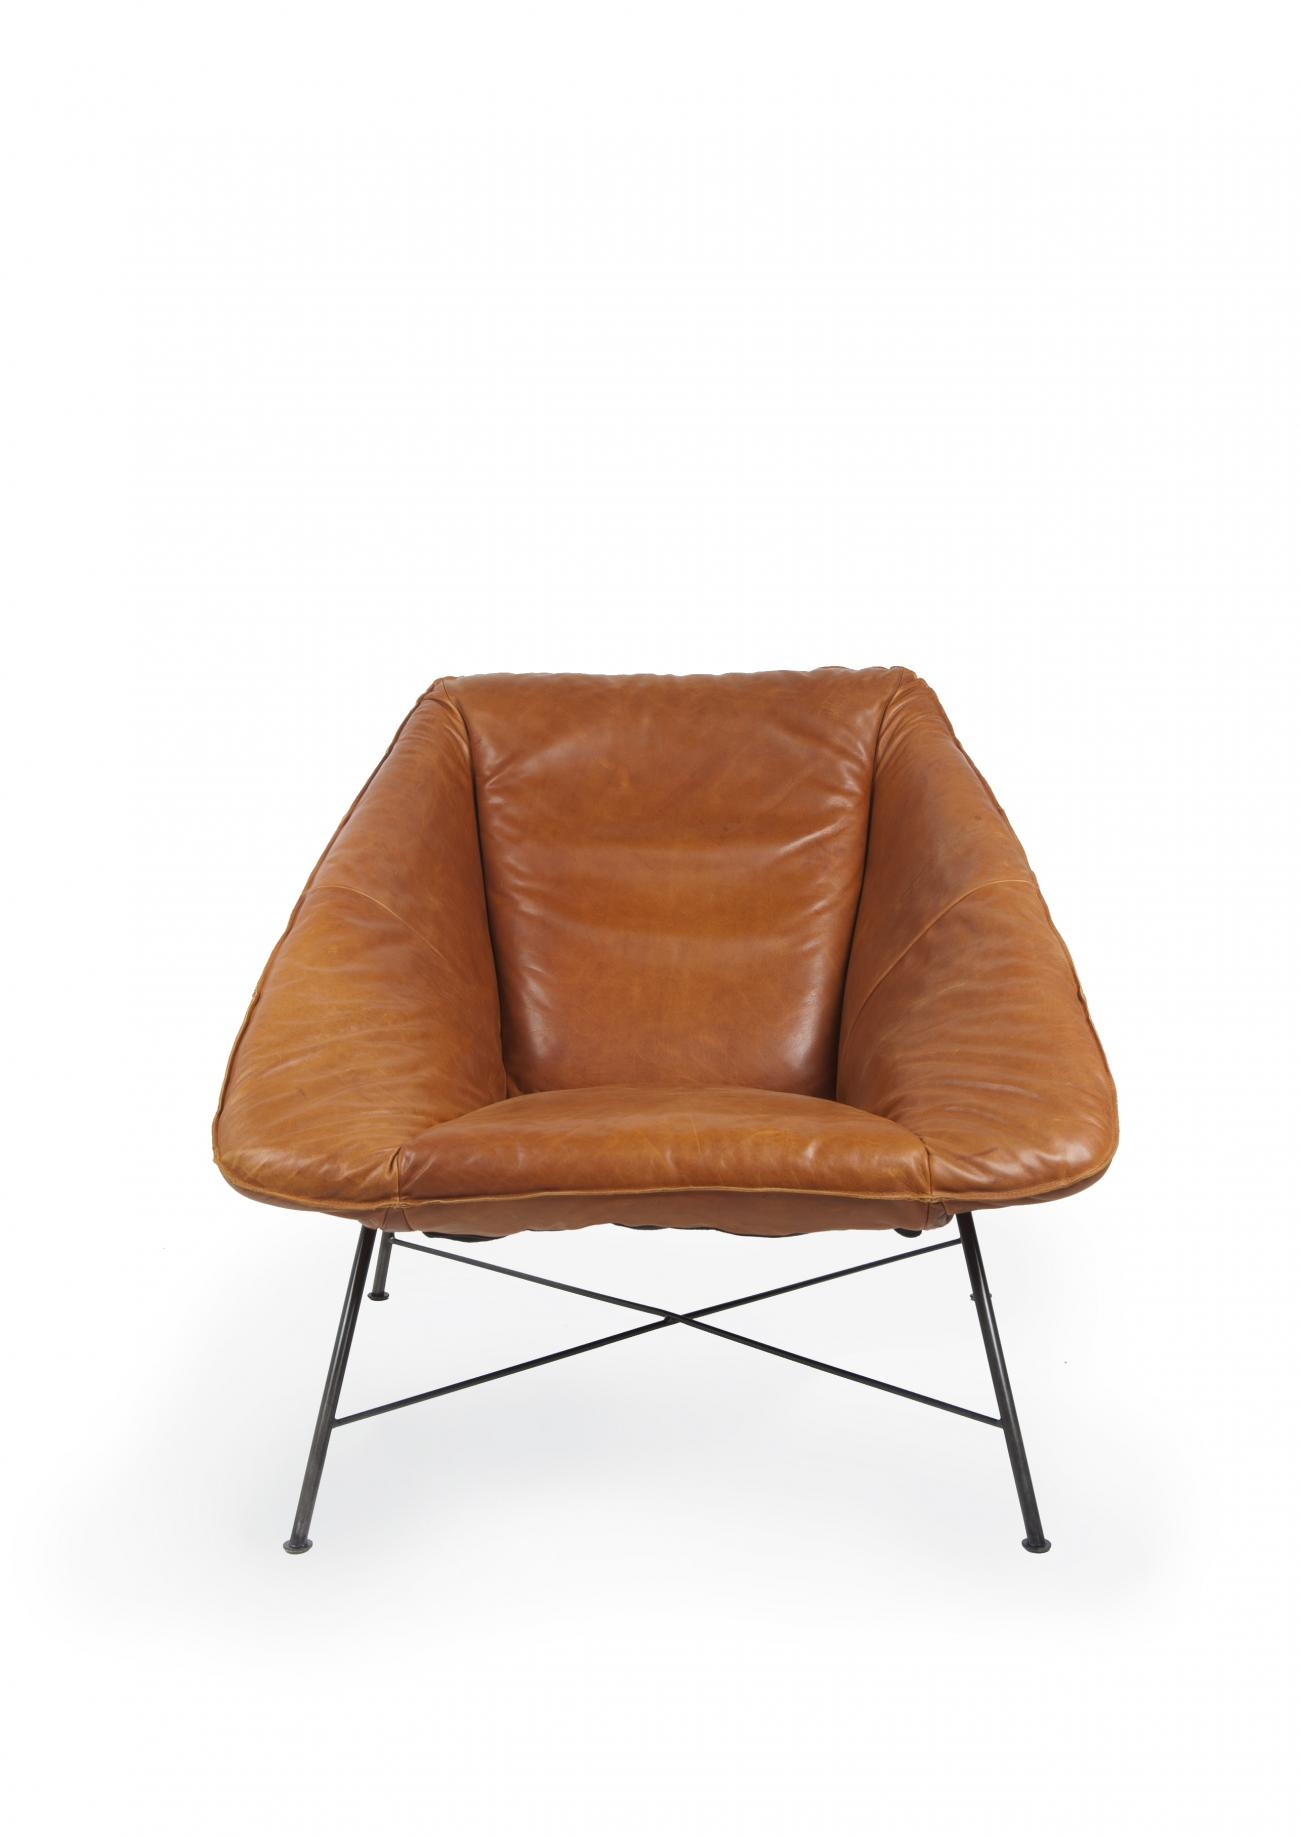 https://www.fundesign.nl/media/catalog/product/b/r/brazil_armchair_with_arm_old_glory_frame_luxor_cognac_front.jpg